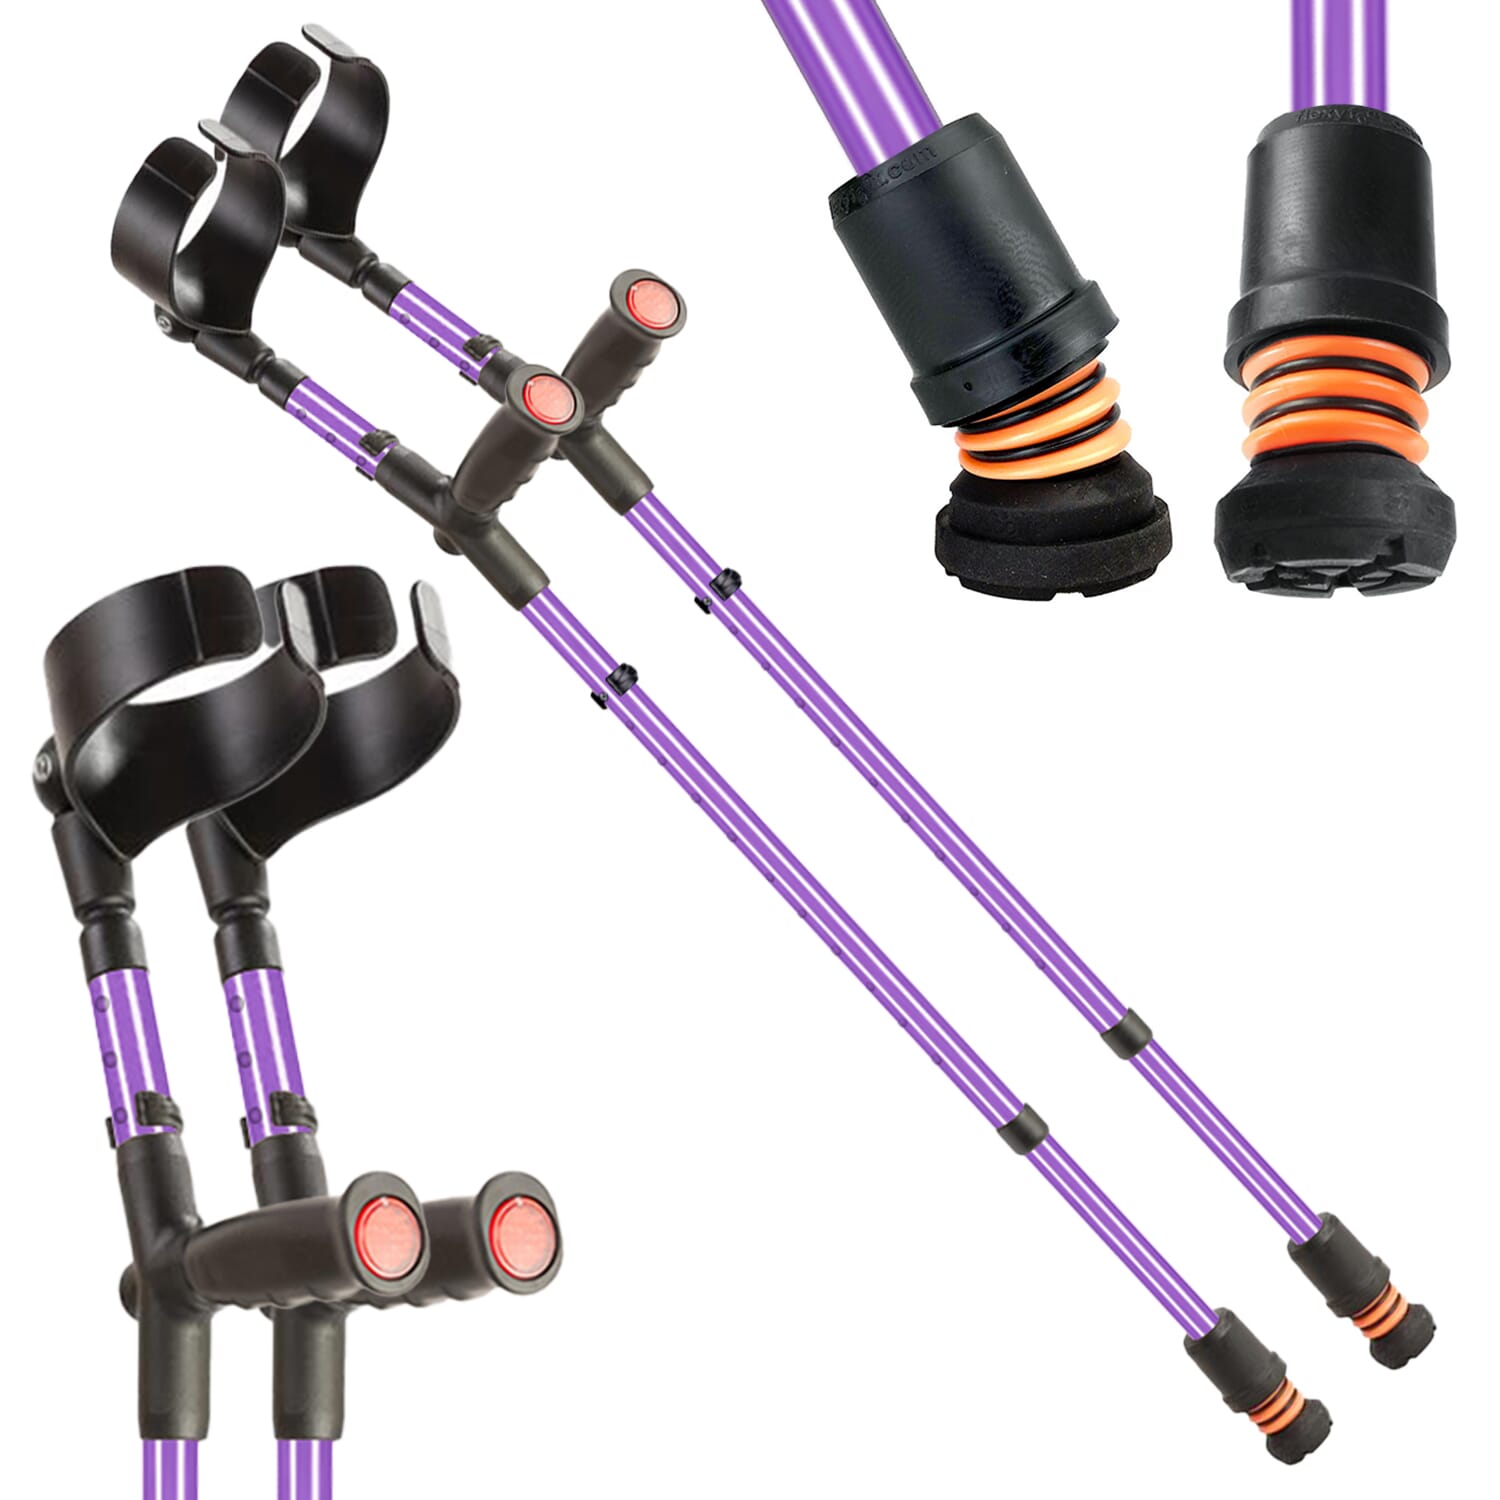 View Flexyfoot Soft Grip Double Adjustable Crutches Lilac Pair information